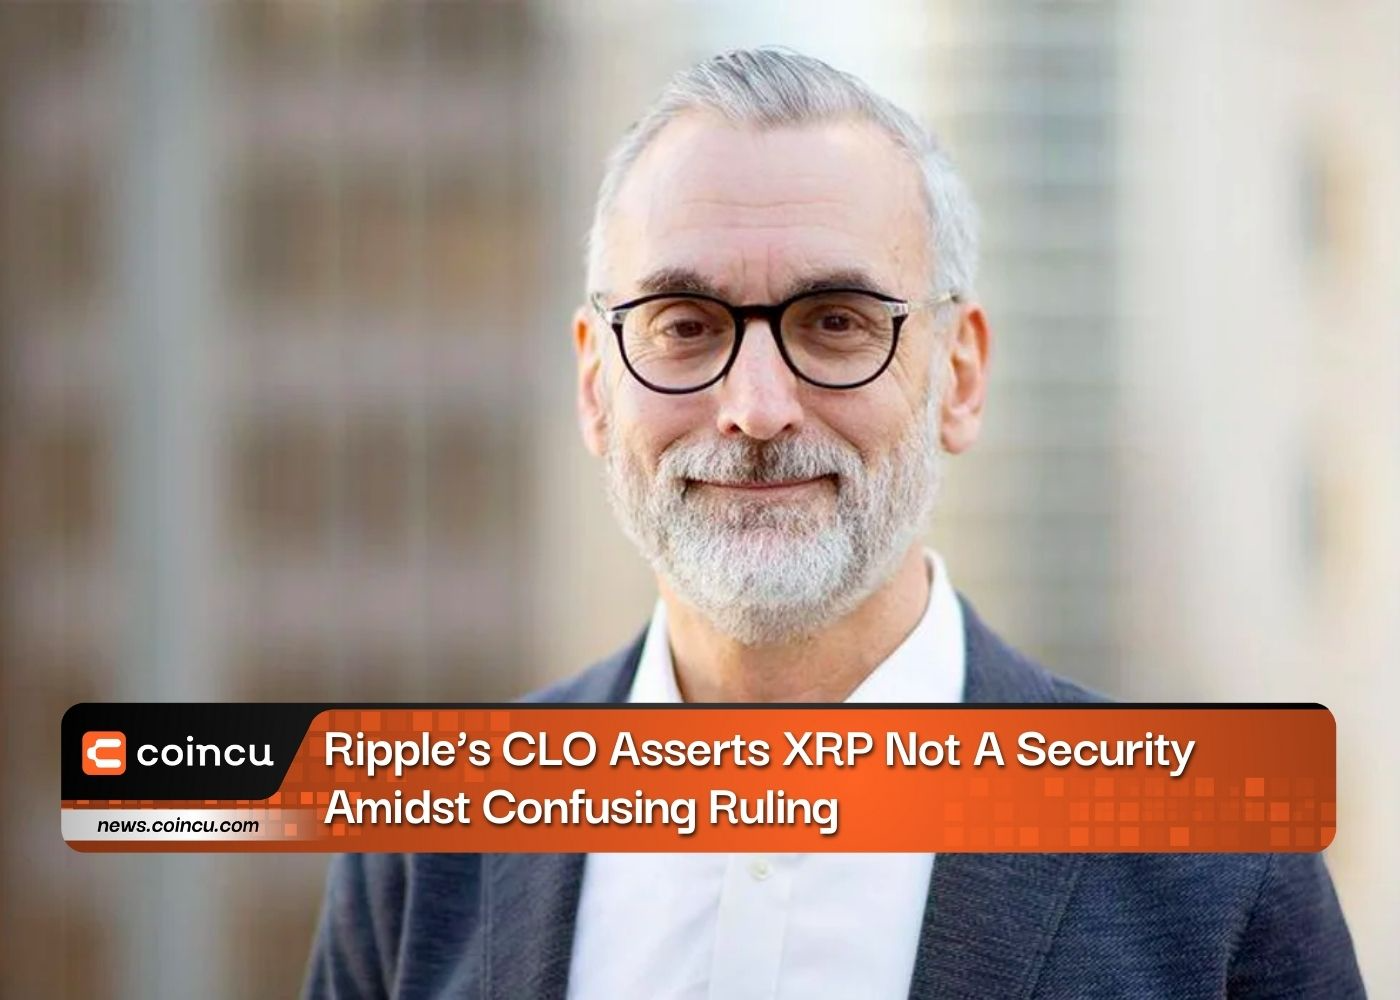 Ripple’s CLO Asserts XRP Not A Security Amidst Confusing Ruling